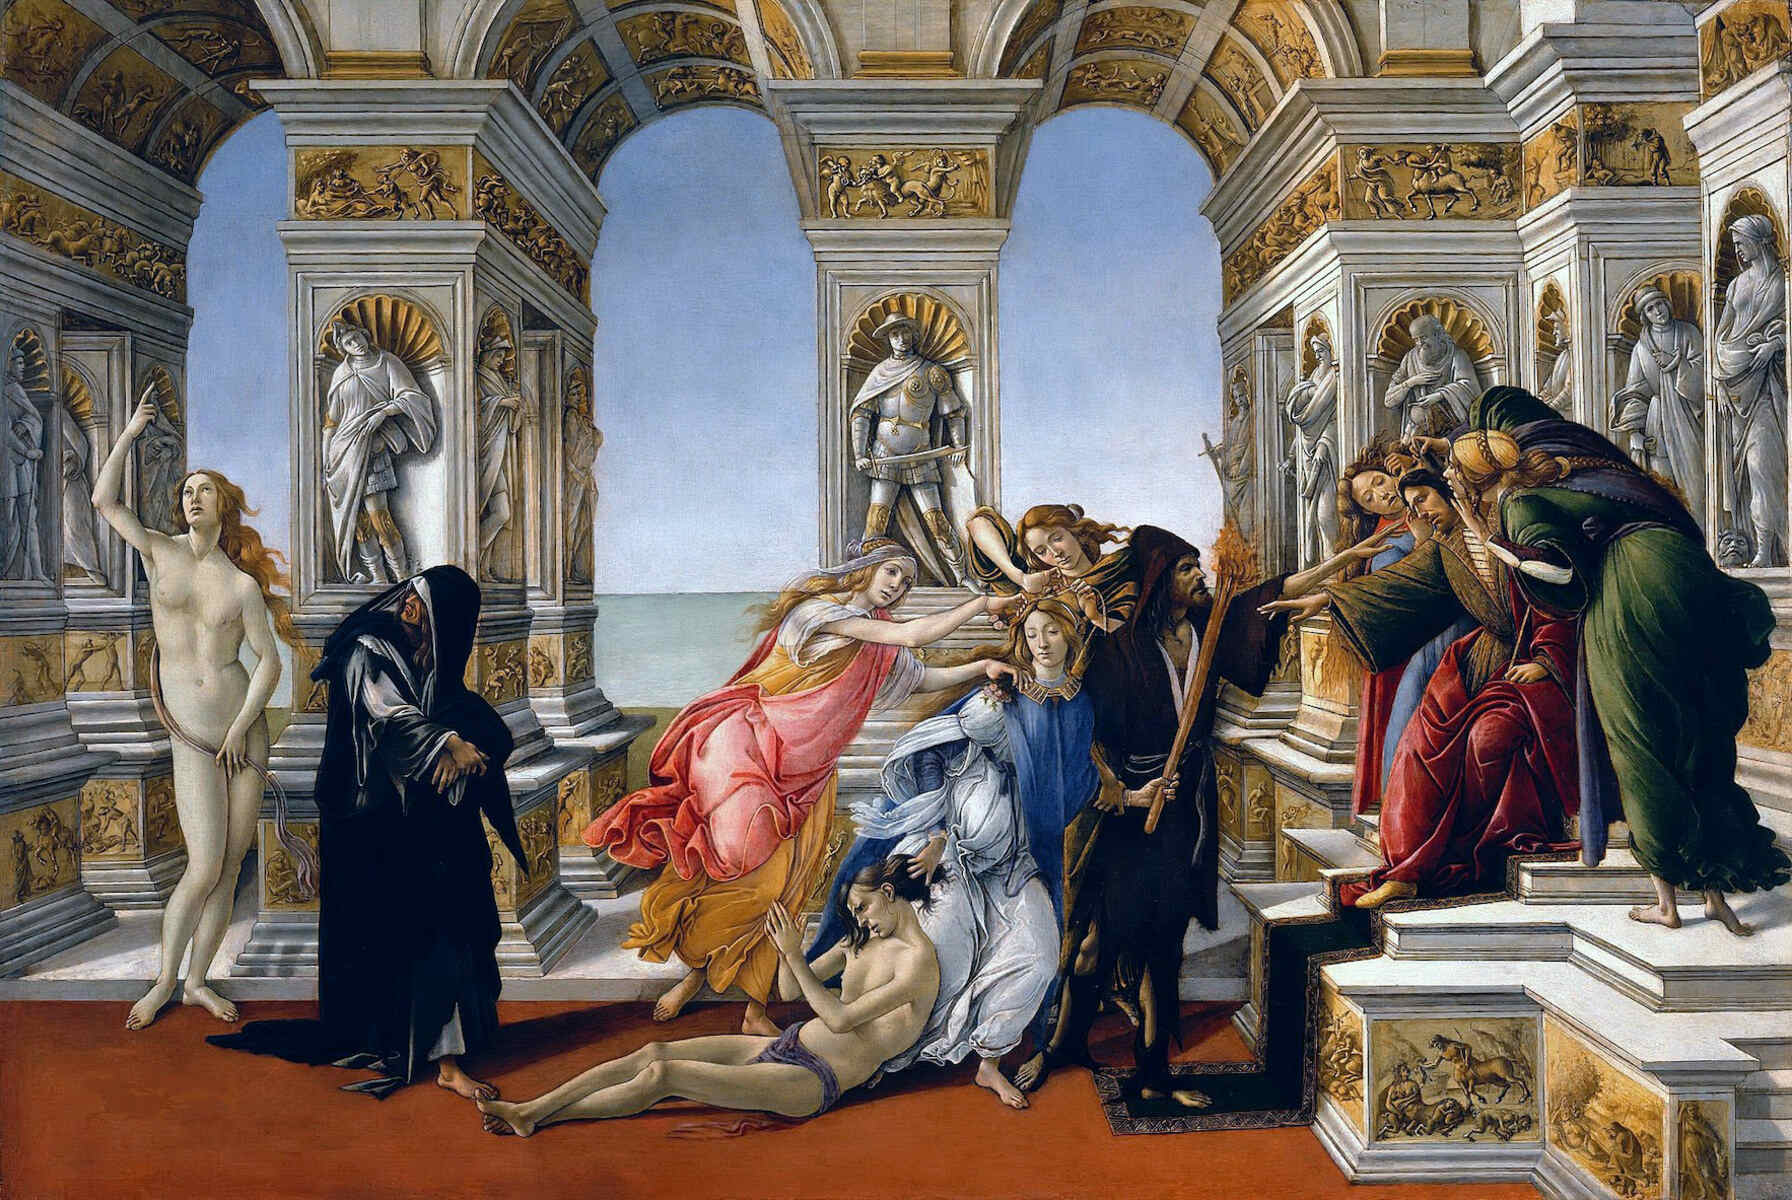 How Did Humanism Influence Renaissance Painting And Sculpture?